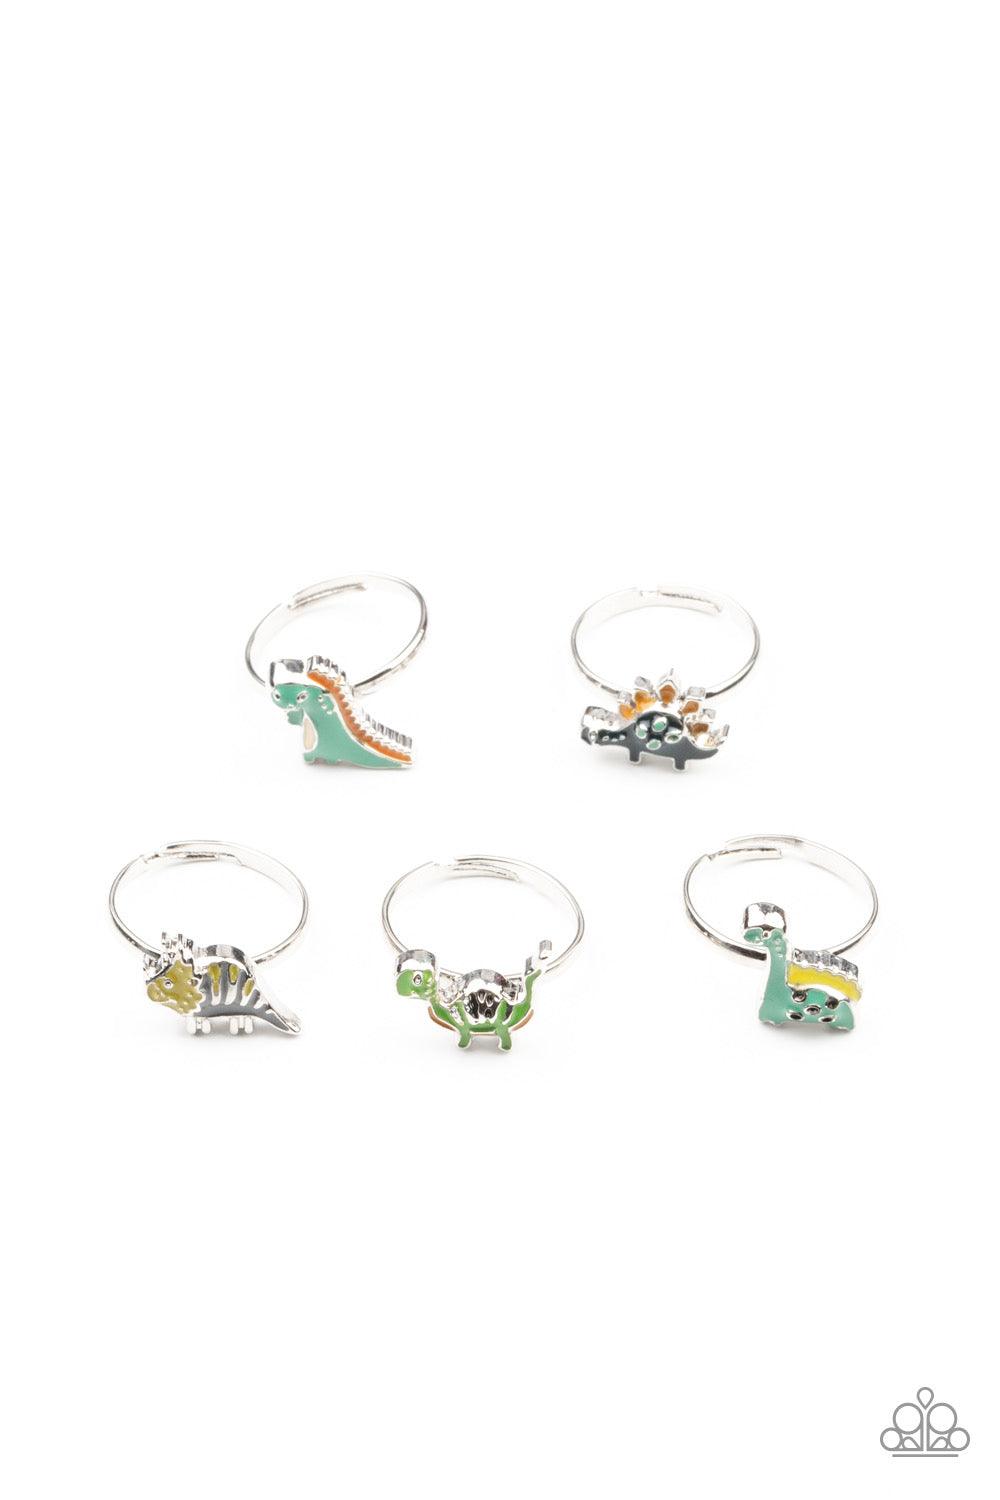 Paparazzi Accessories Starlet Shimmer Earrings #21: - White Airy silver butterfly frames featuring glittery rhinestones vary in shades of green, yellow purple, pink, white, blue, red, purple, and multicolored. Earrings attach to standard post fittings. Je